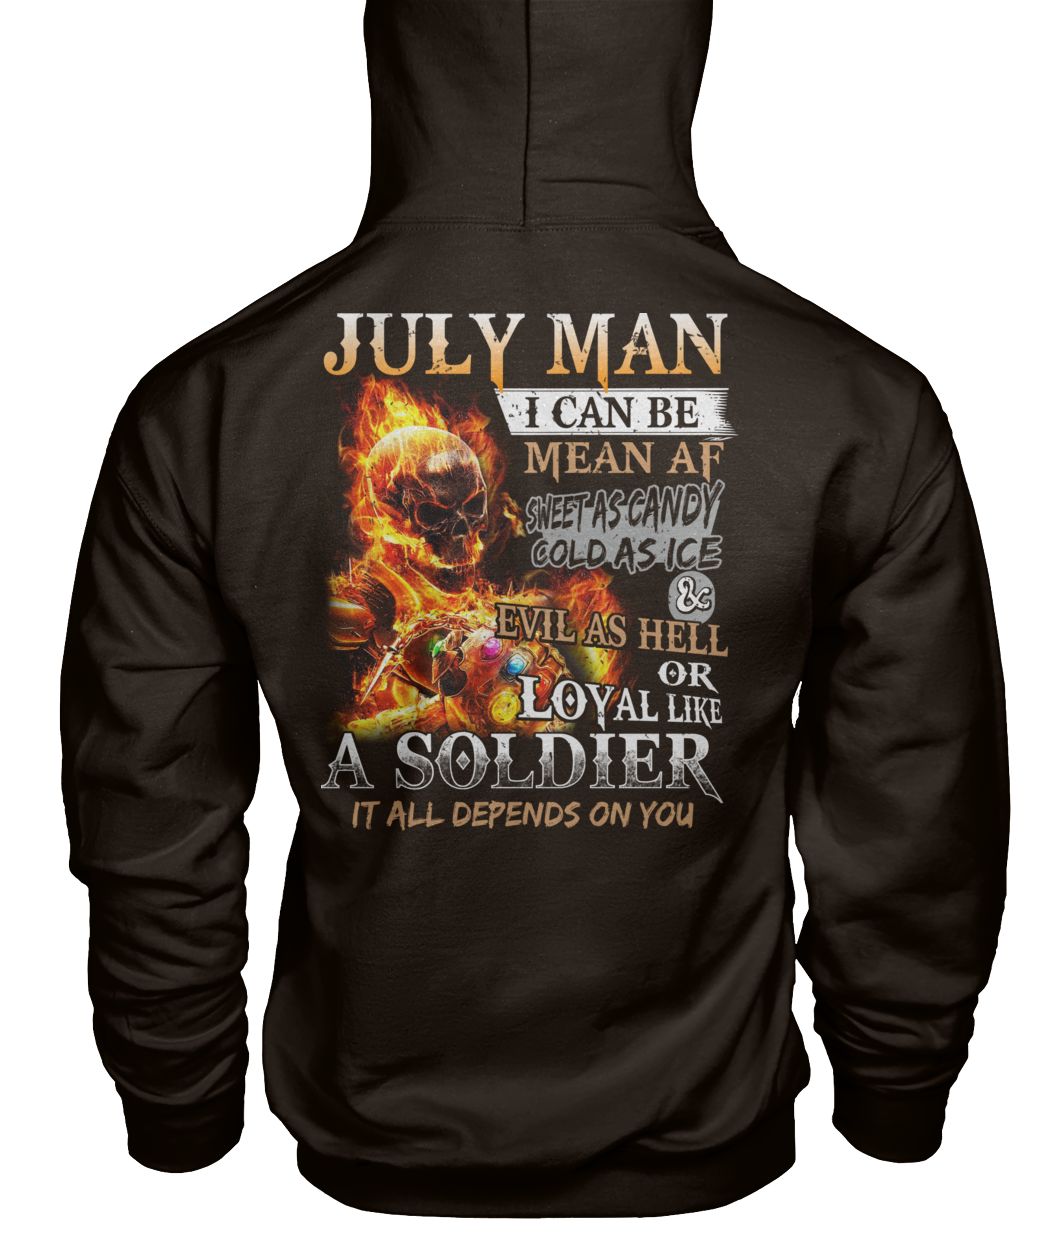 July man I can be mean af sweet as candy gold as ice and evil as hell gildan hoodie